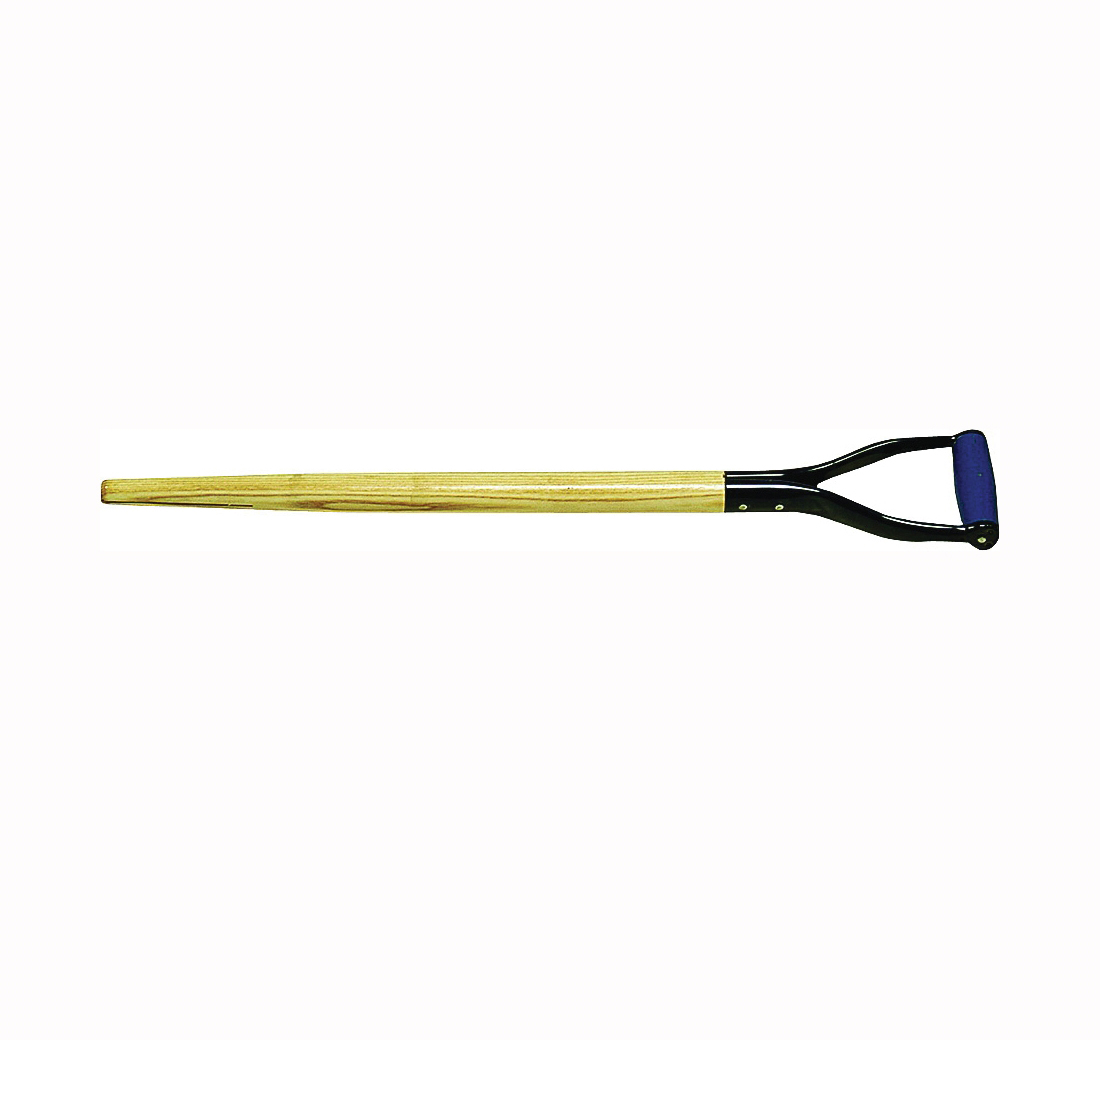 66778 Shovel Handle, 1-1/2 in Dia, 30 in L, Ash Wood, Clear